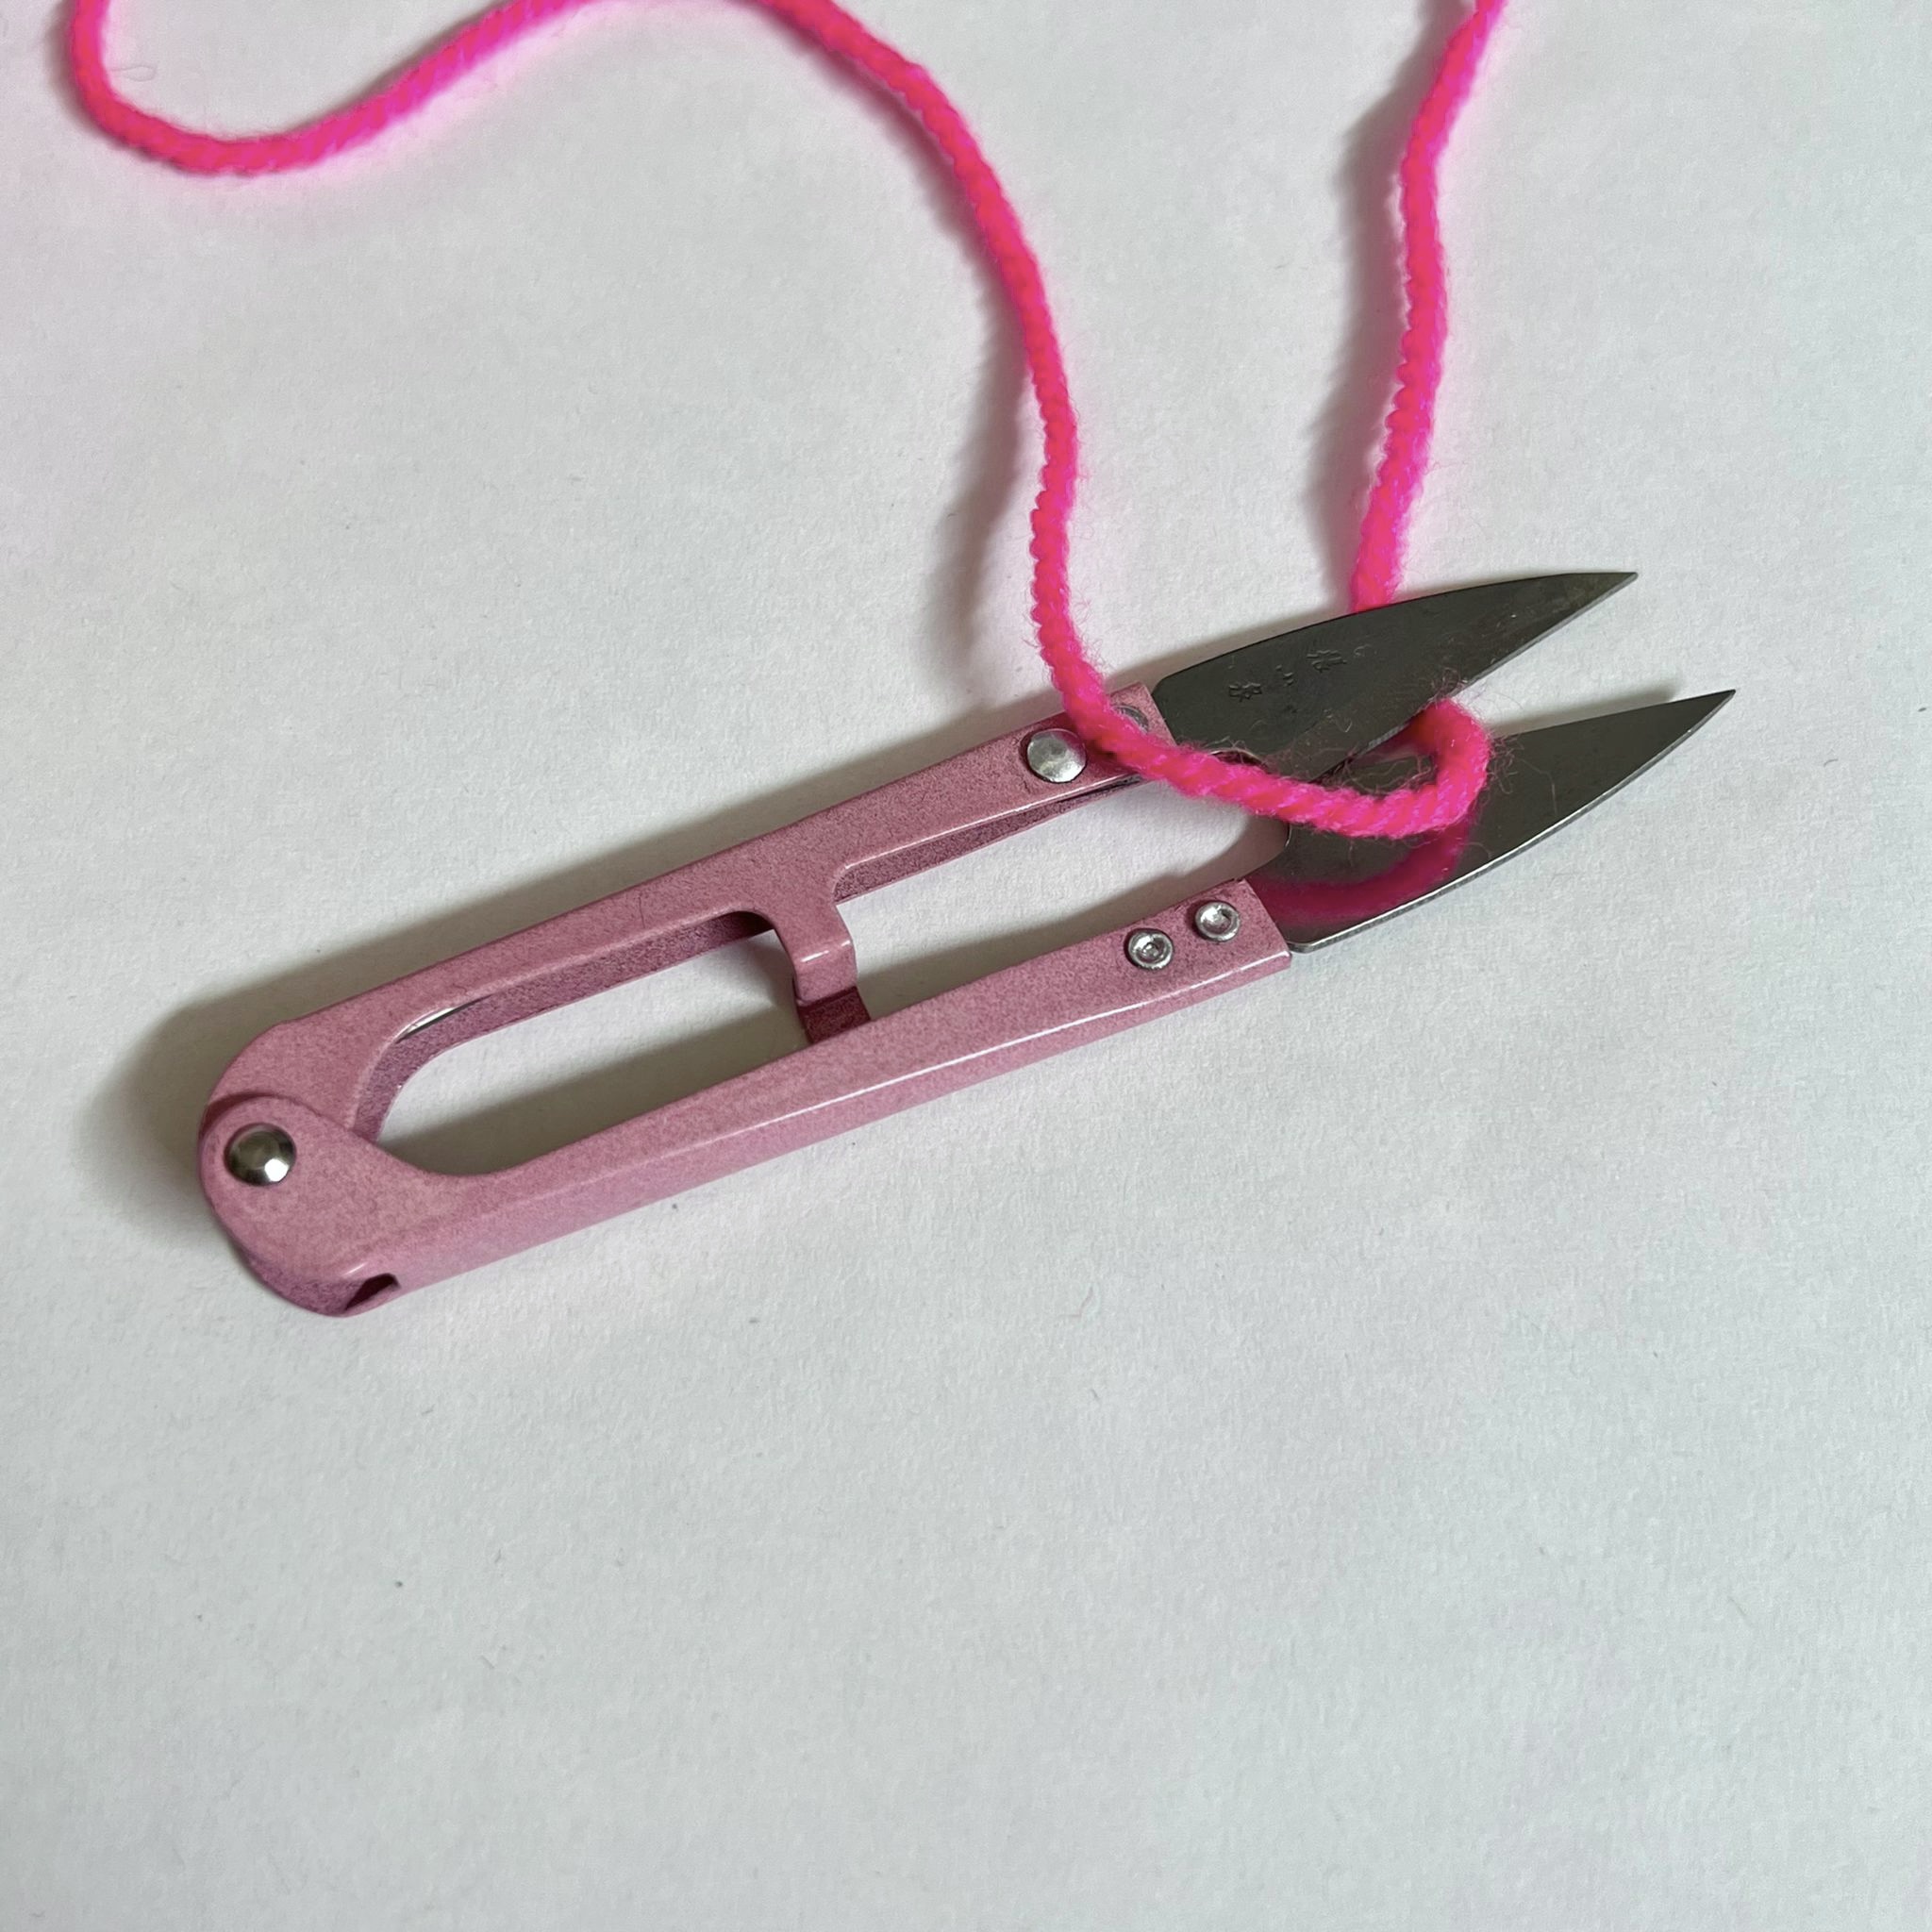 yarn scissors clippers tufting